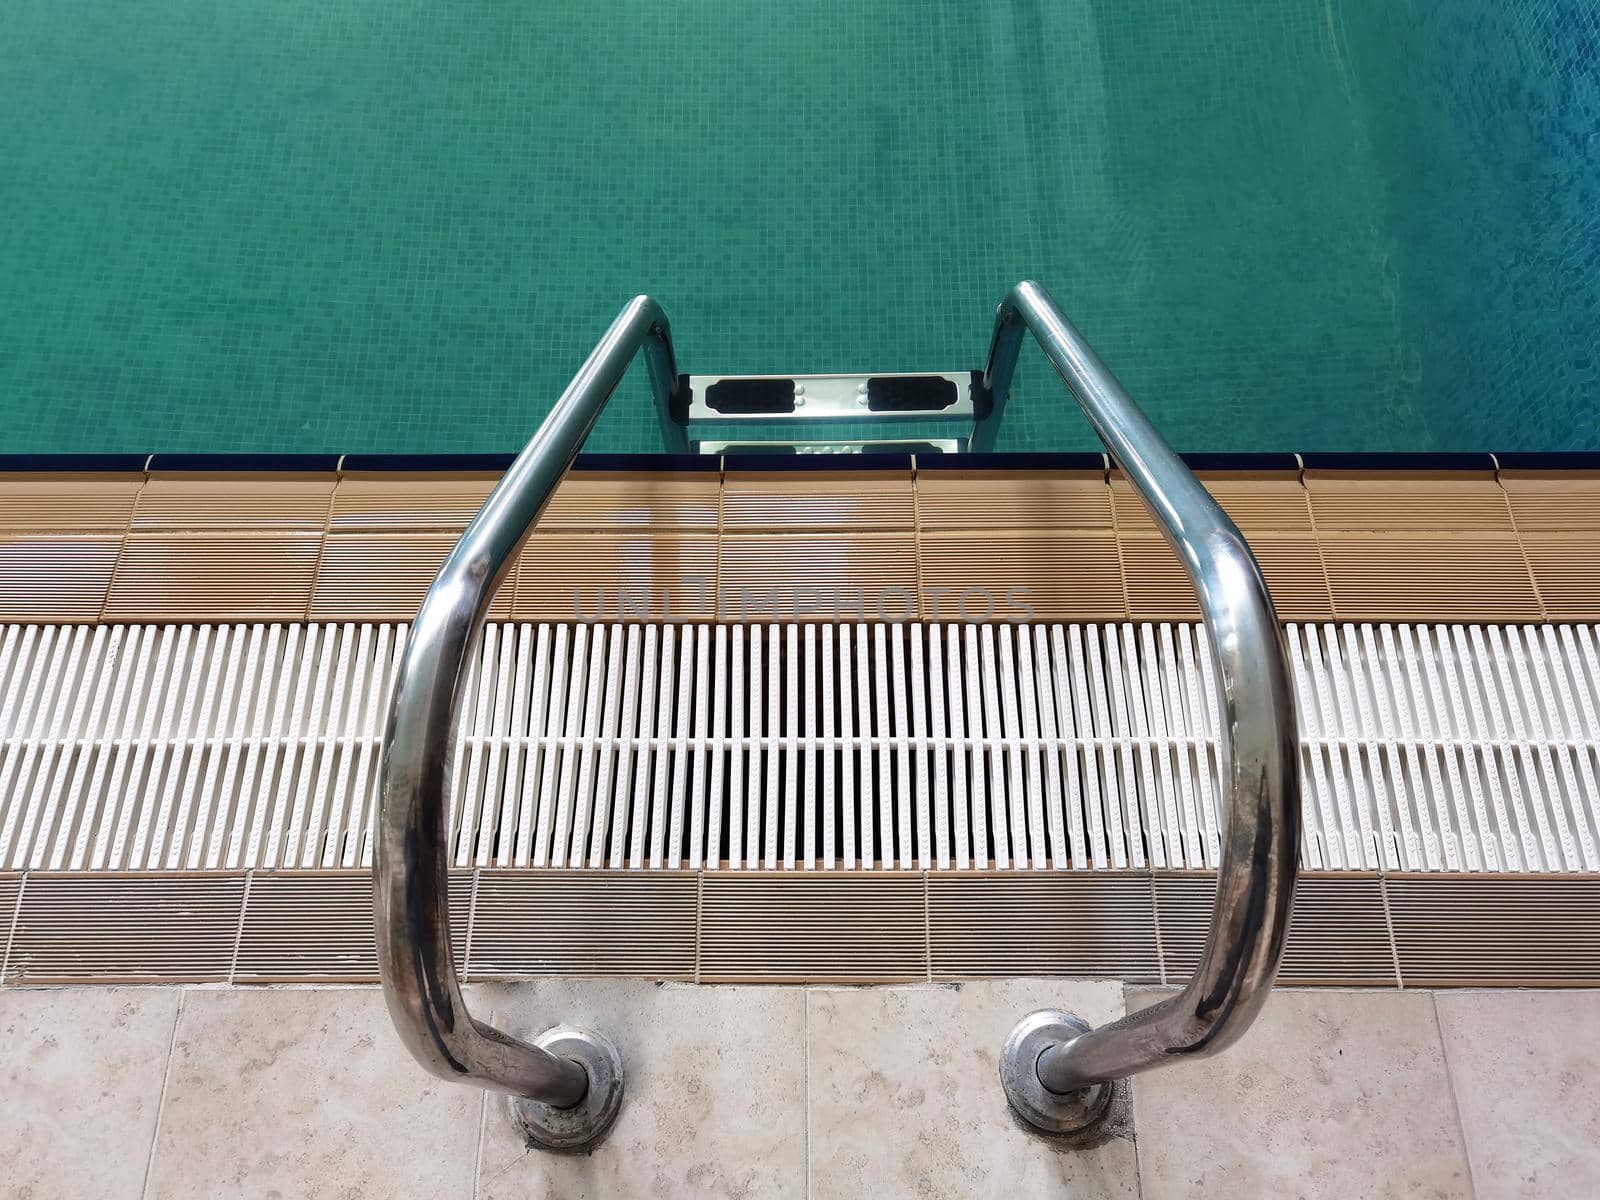 Handrail on pool. Swimming pool with stair at tropical resort. Top view